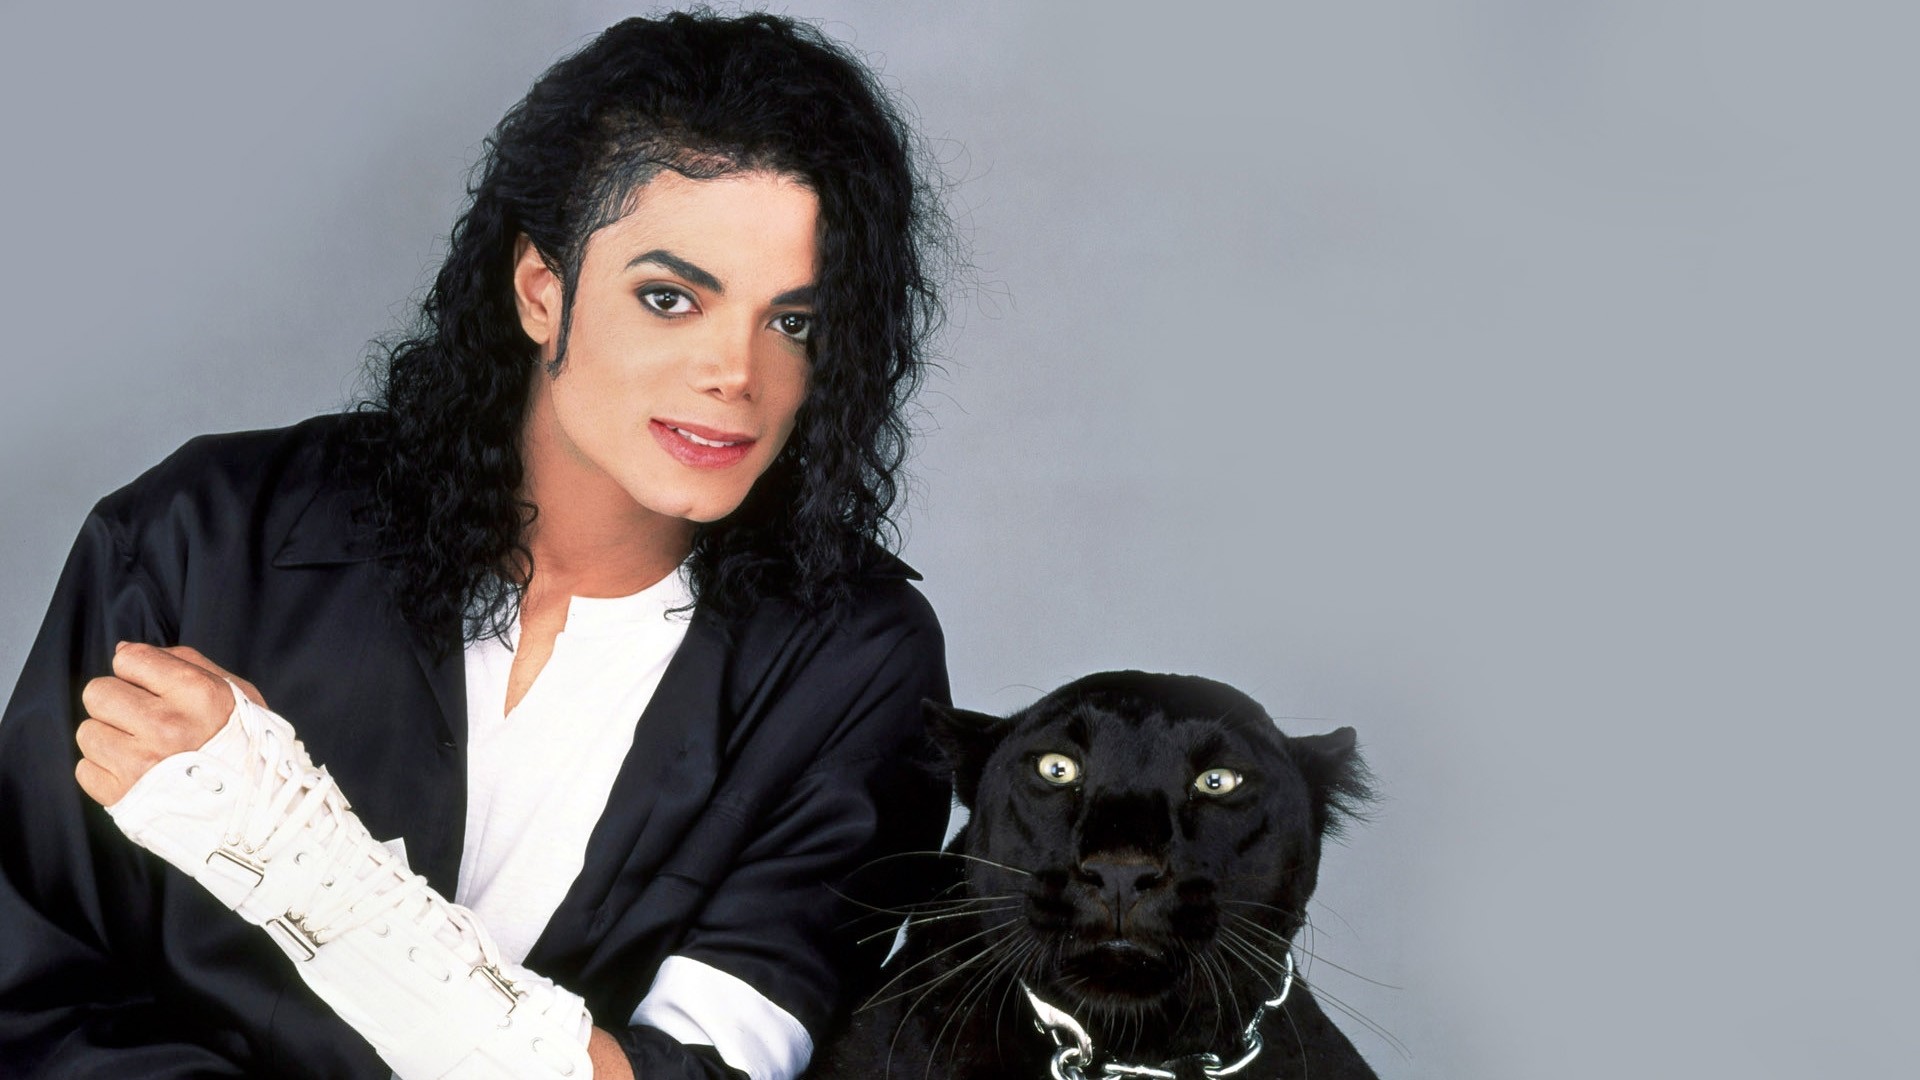 1920x1080 Wallpaper Michael jackson, Panther, Brunette, Costume, Cat HD, Picture,  Image